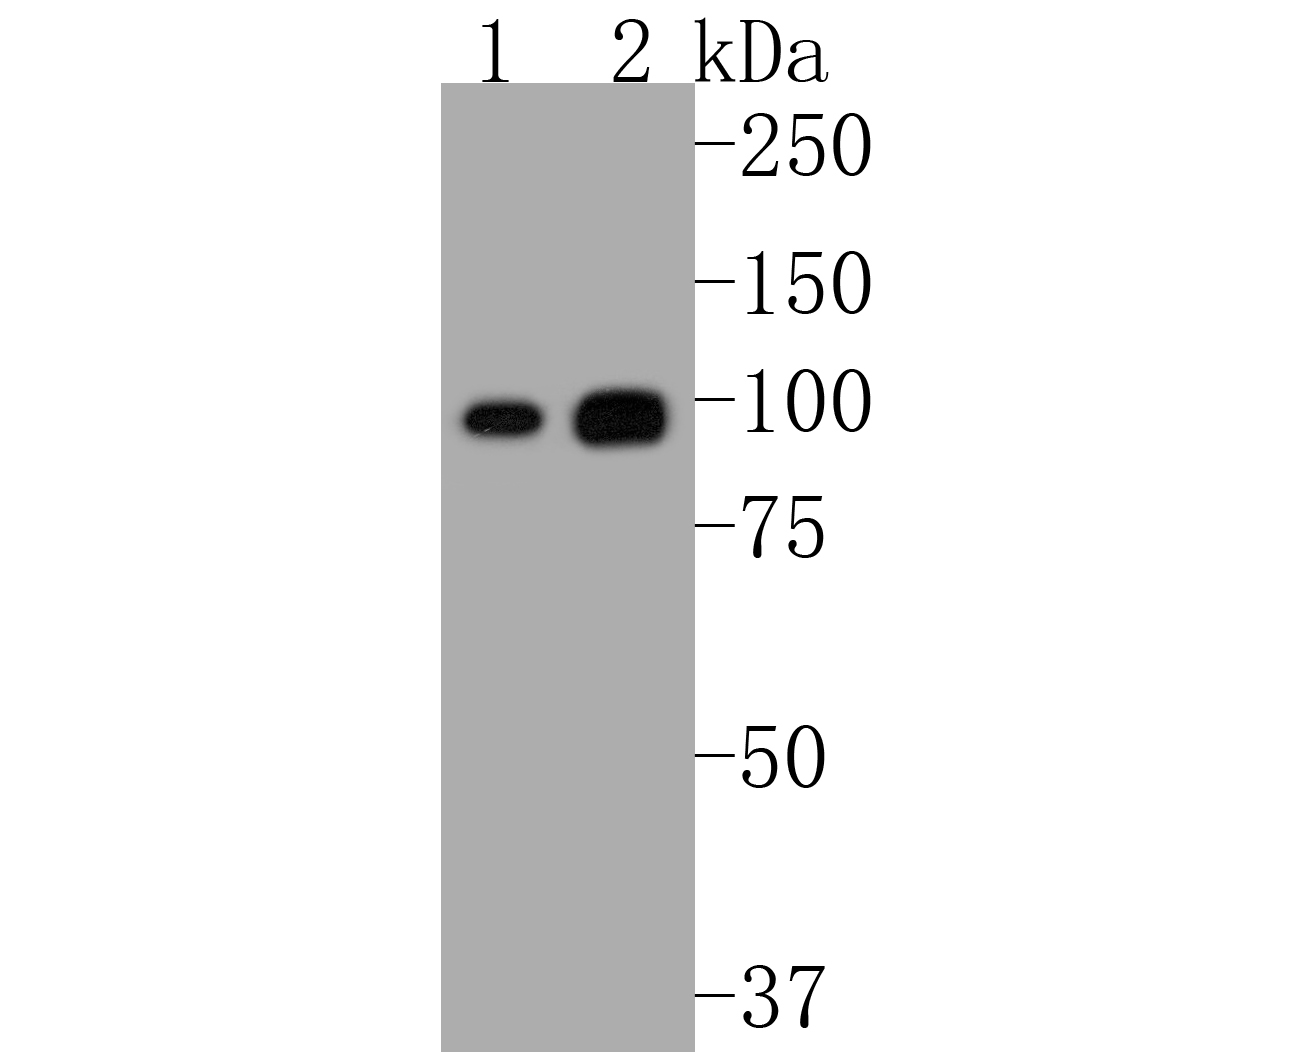 Western blot analysis of Phospho-Nrf2(S40) on different lysates. Proteins were transferred to a PVDF membrane and blocked with 5% BSA in PBS for 1 hour at room temperature. The primary antibody (ET1608-28, 1/500) was used in 5% BSA at room temperature for 2 hours. Goat Anti-Rabbit IgG - HRP Secondary Antibody (HA1001) at 1:5,000 dilution was used for 1 hour at room temperature.
Positive control: 
Lane 1: HepG2 cell lysate
Lane 2: Raji cell lysate